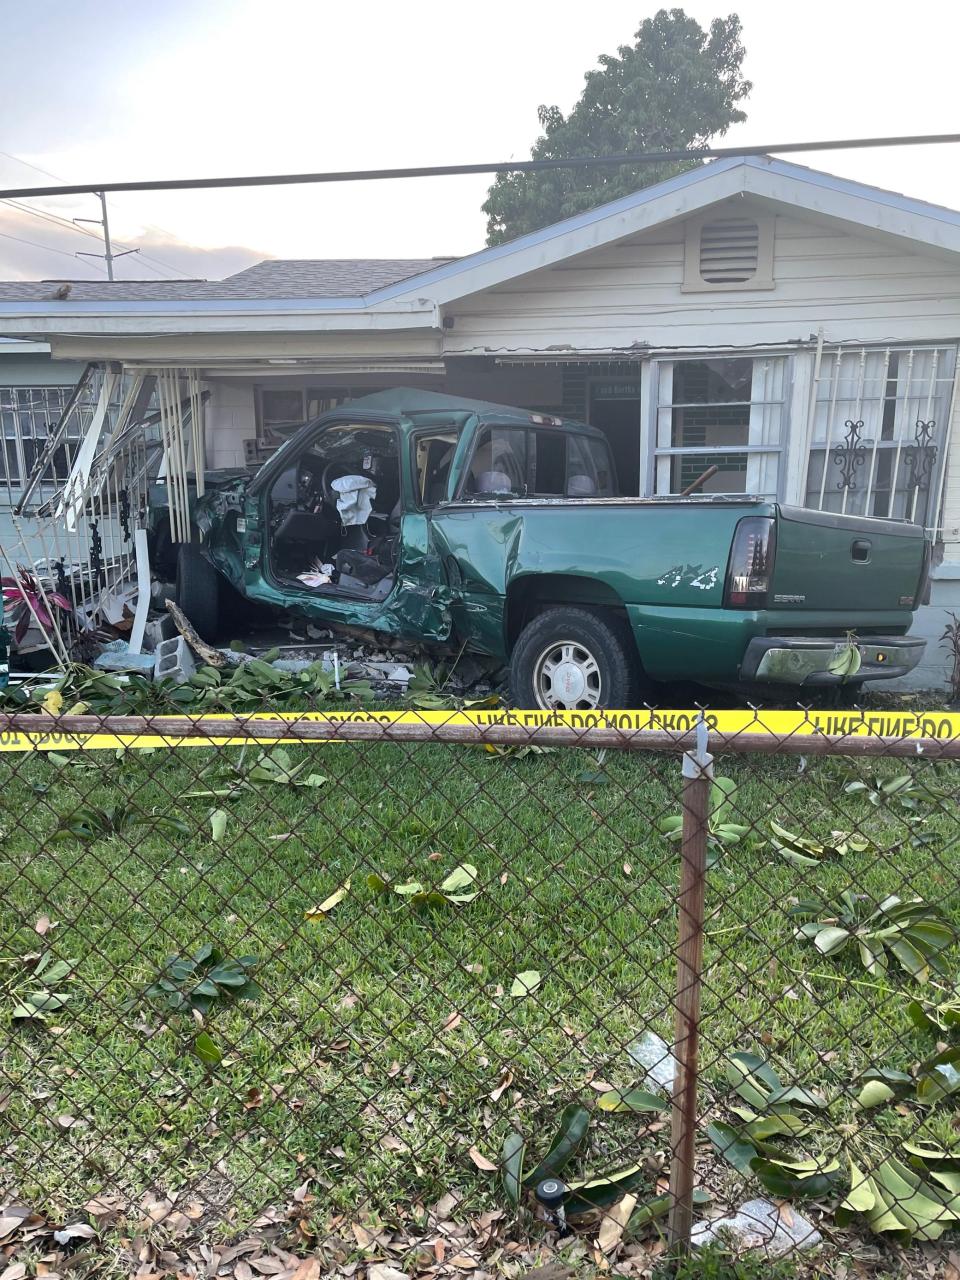 Police say Mayor Blake was not home at the time of the crash. 